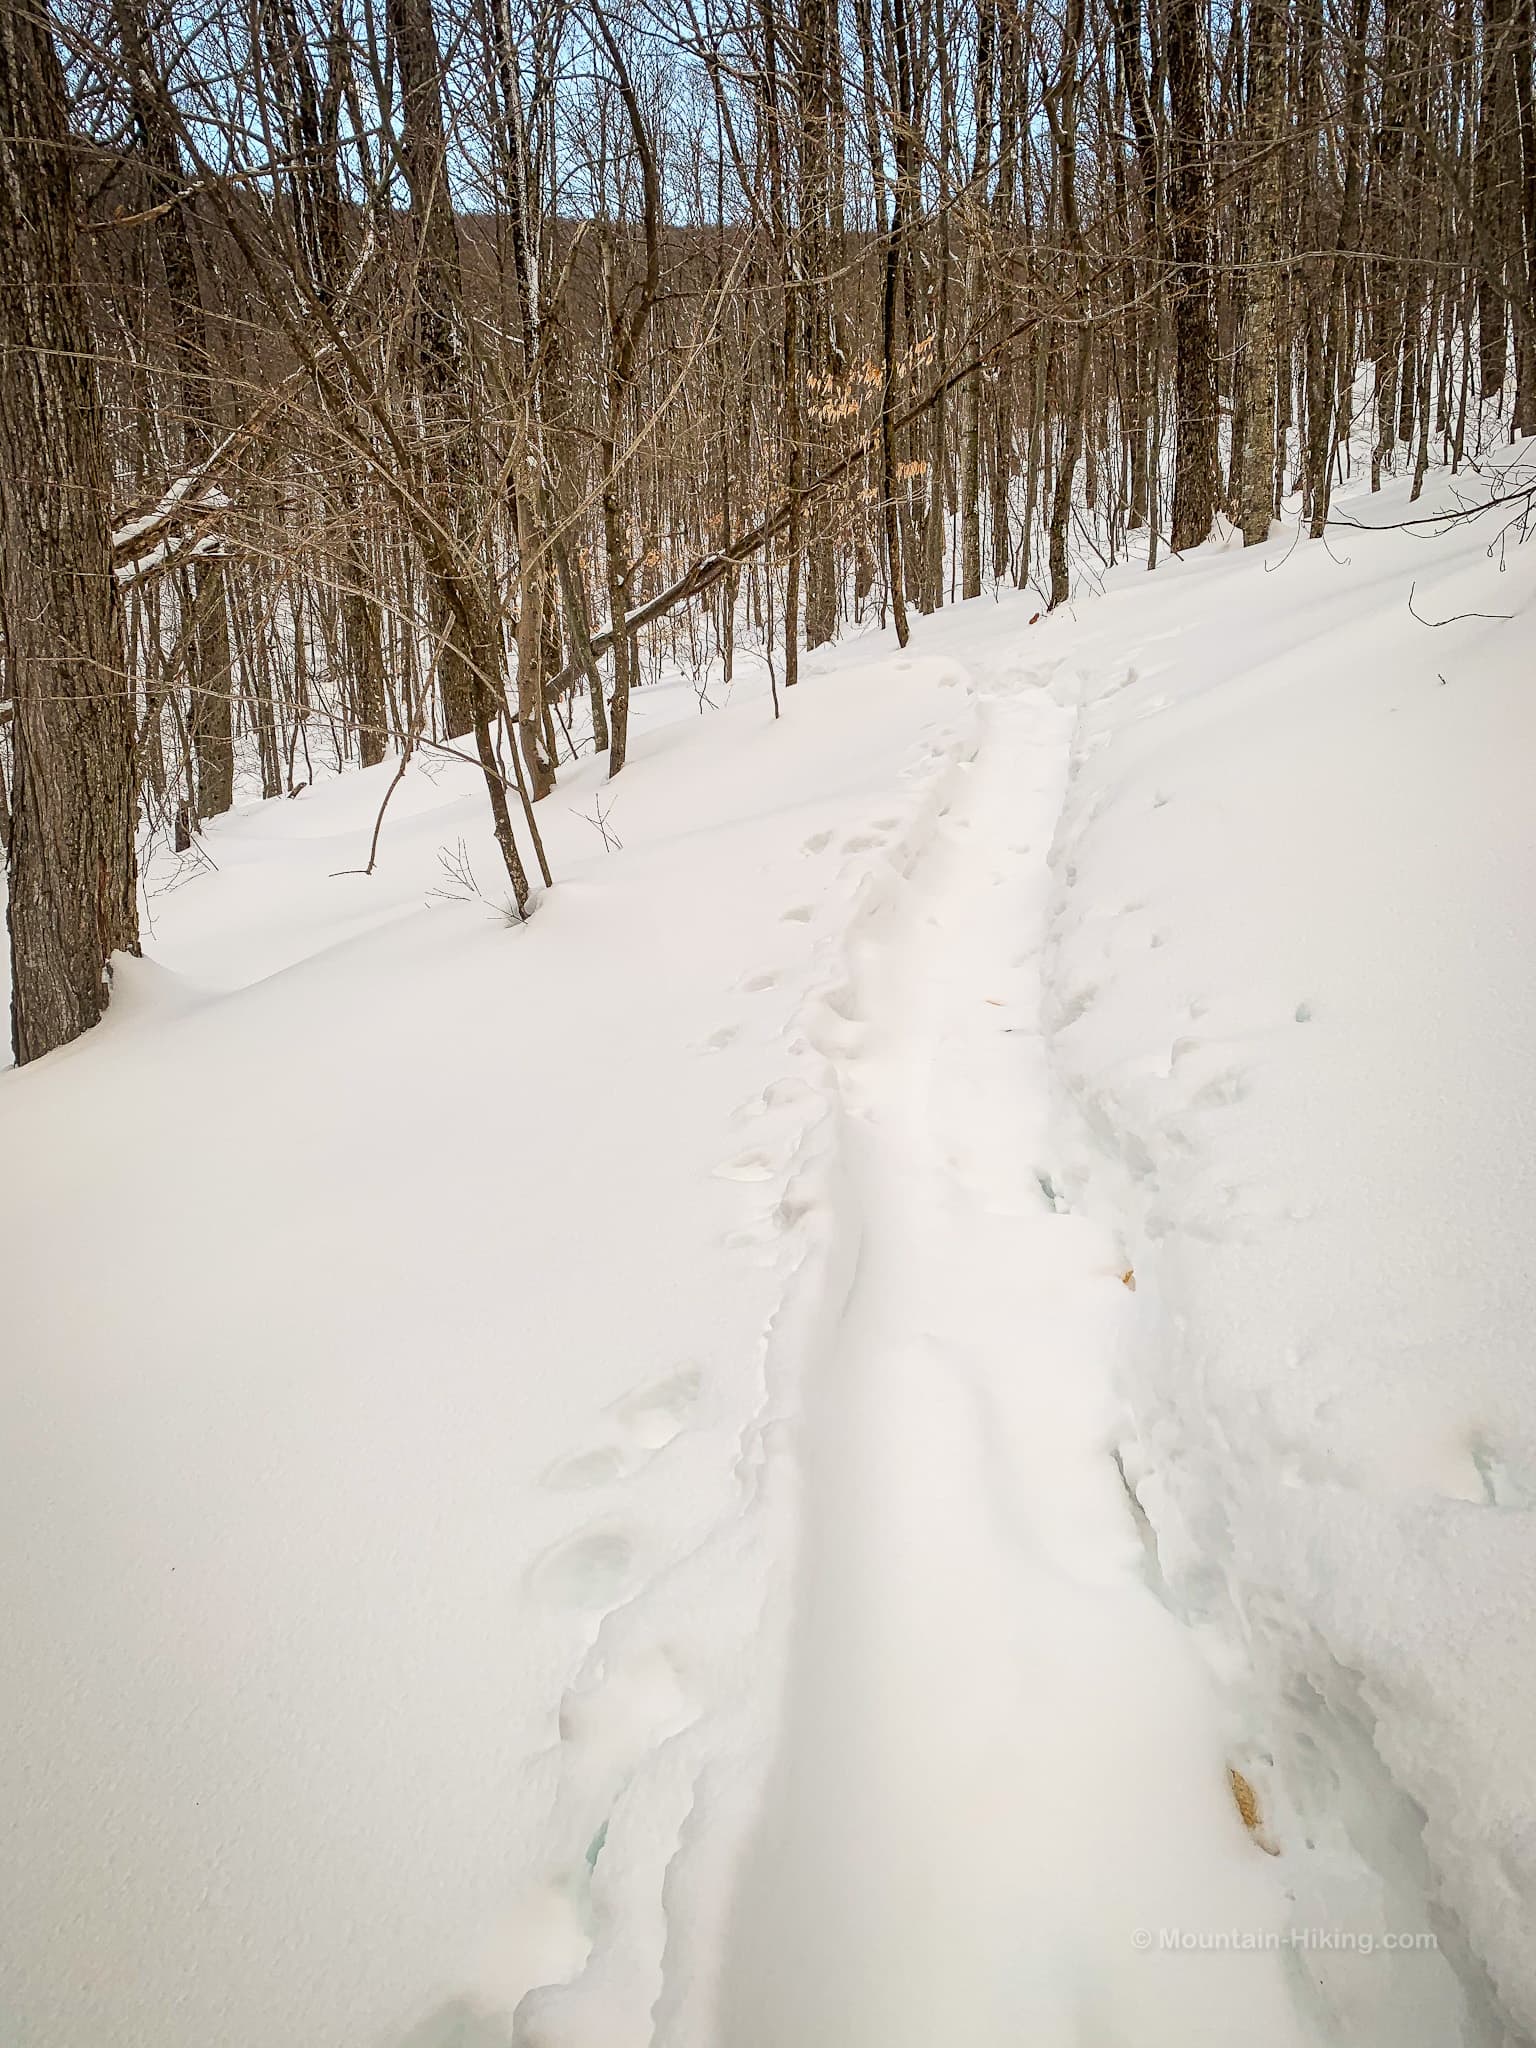 winter trail terms: snowshoe trench in snow